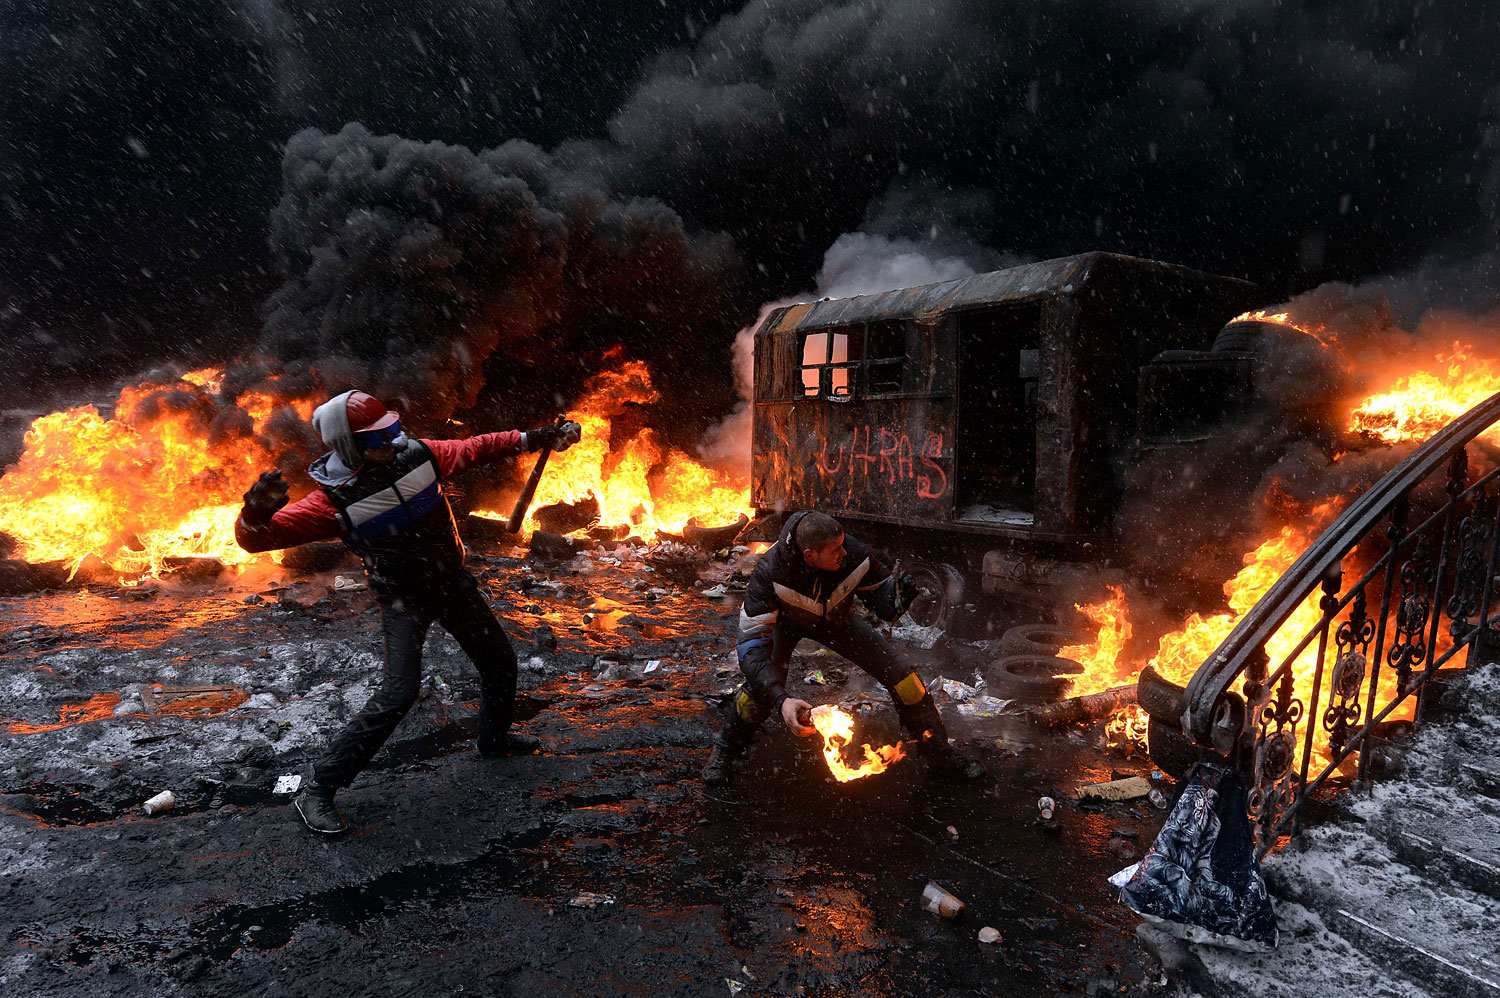 A protestor throws a molotov cocktail at riot police in the centre of Kiev on Jan. 22, 2014.